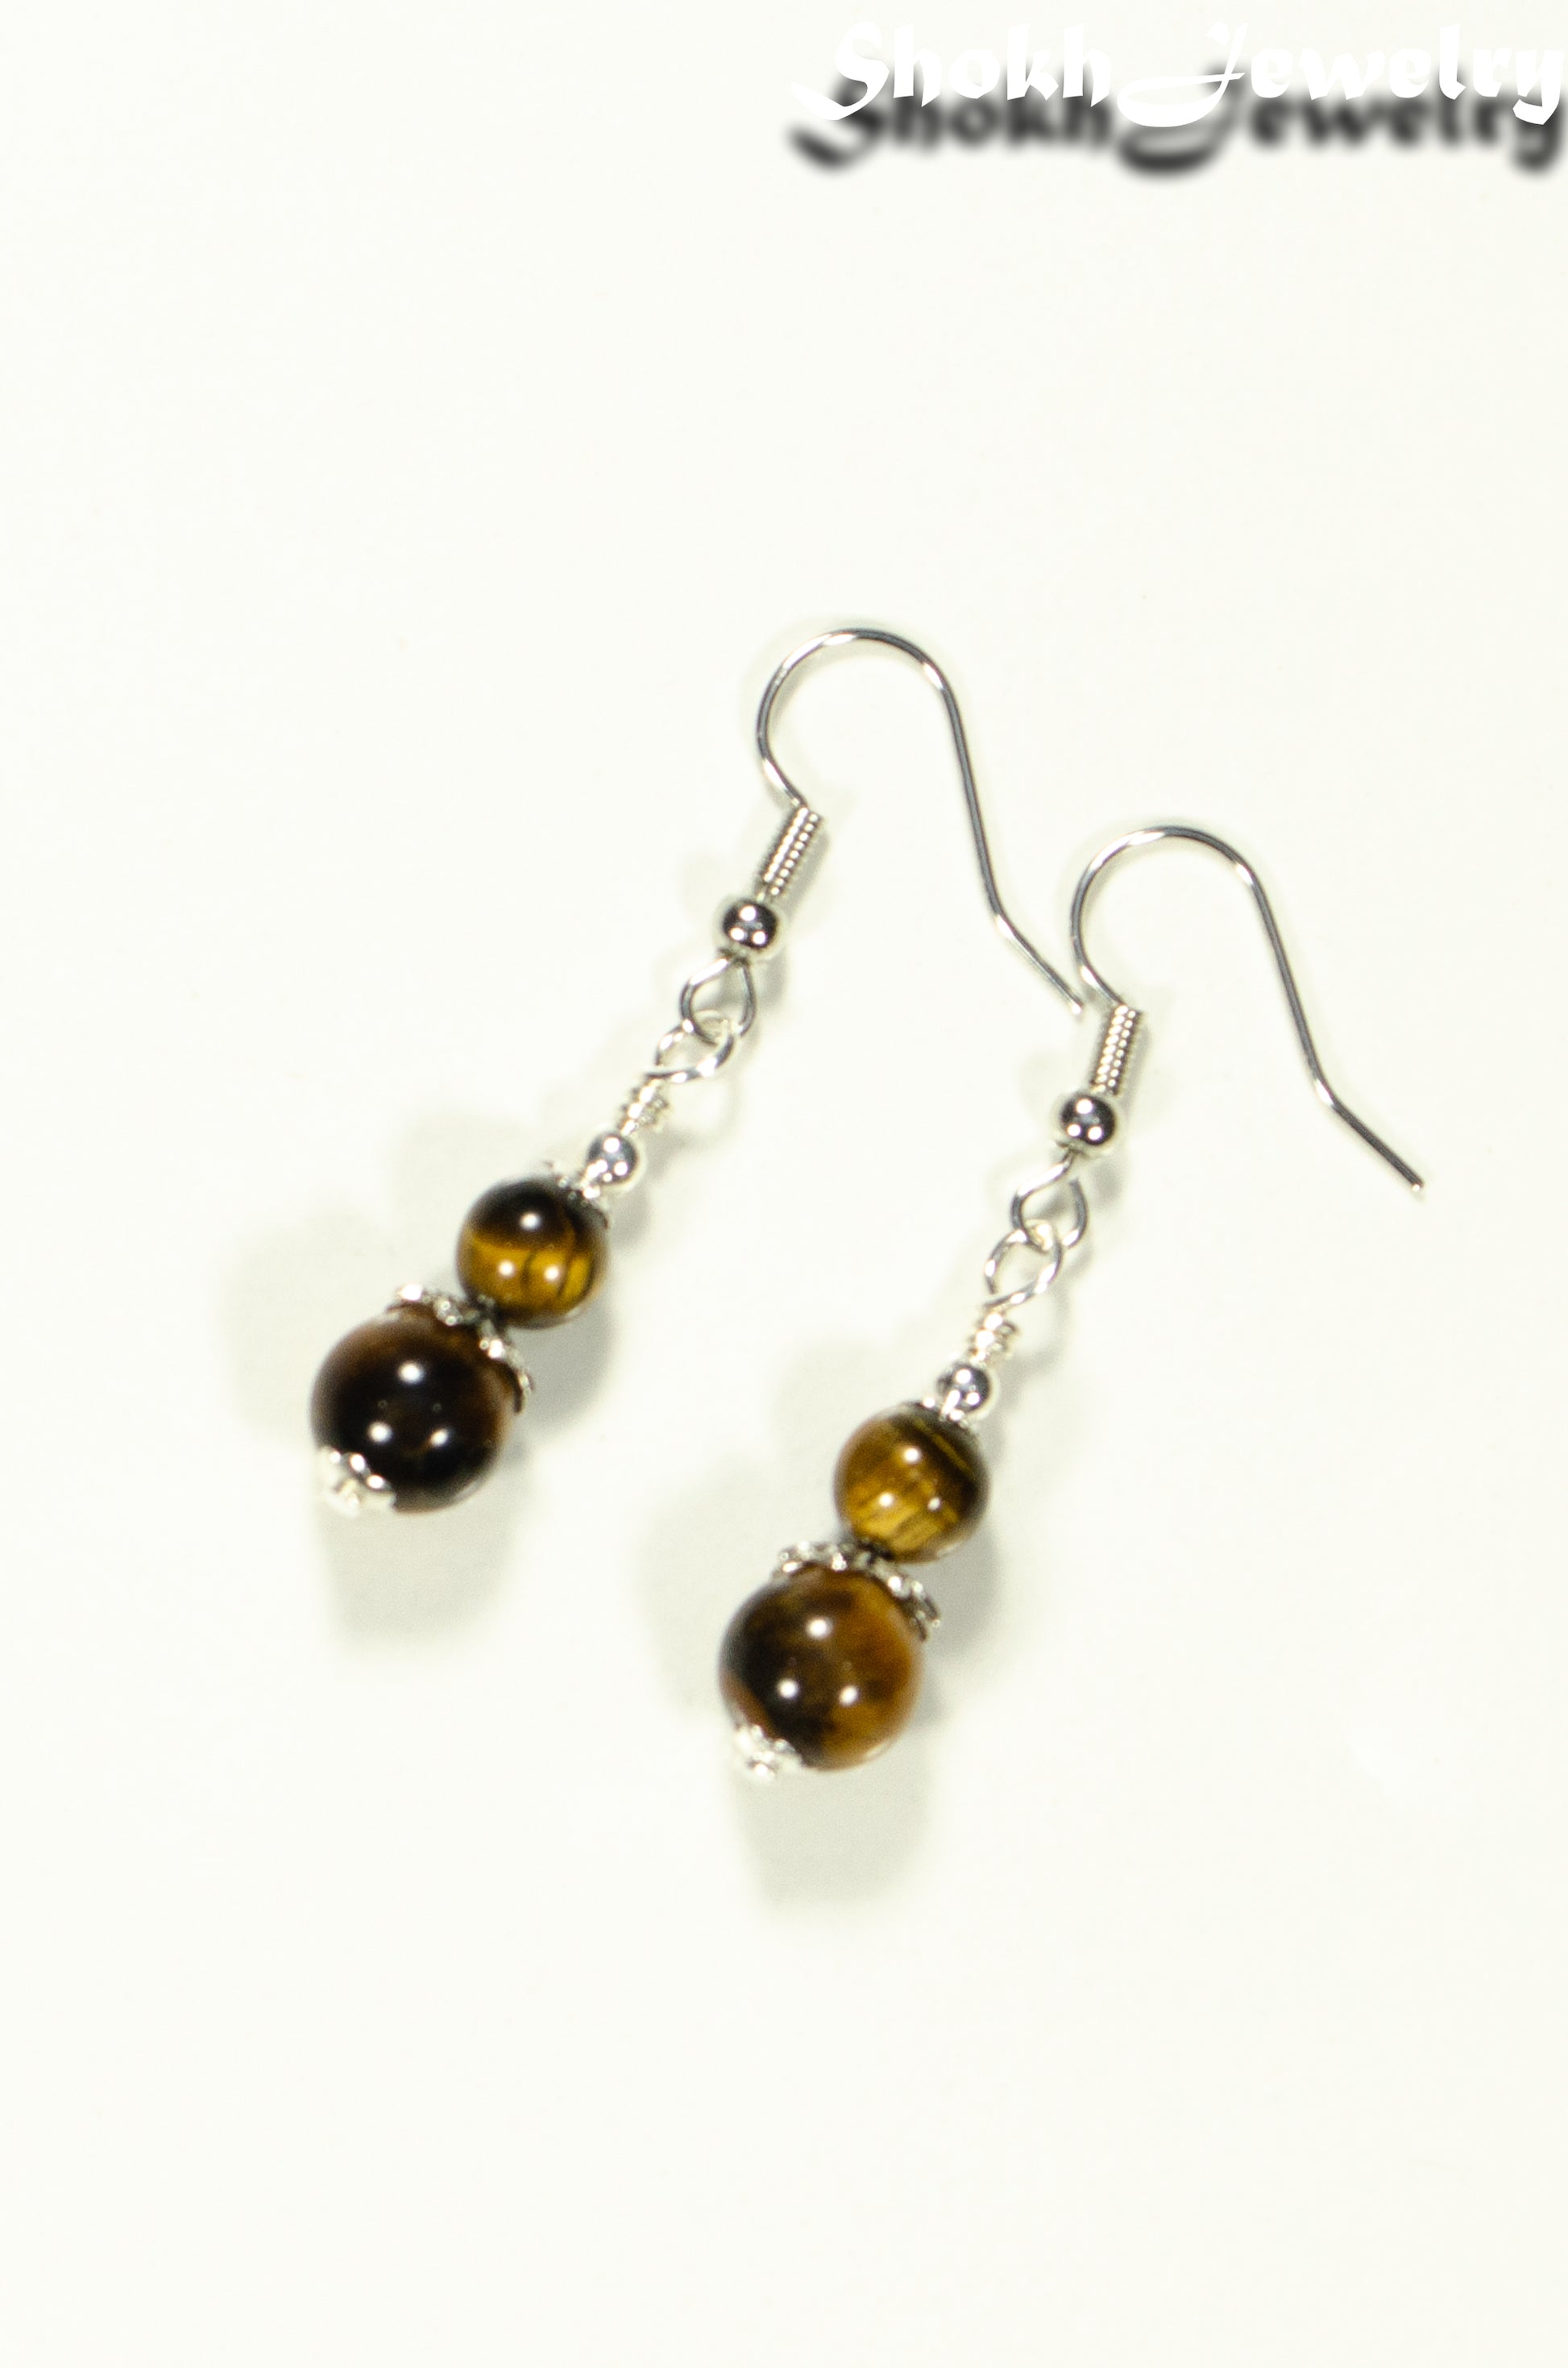 Top view of Small Tiger's Eye Earrings.